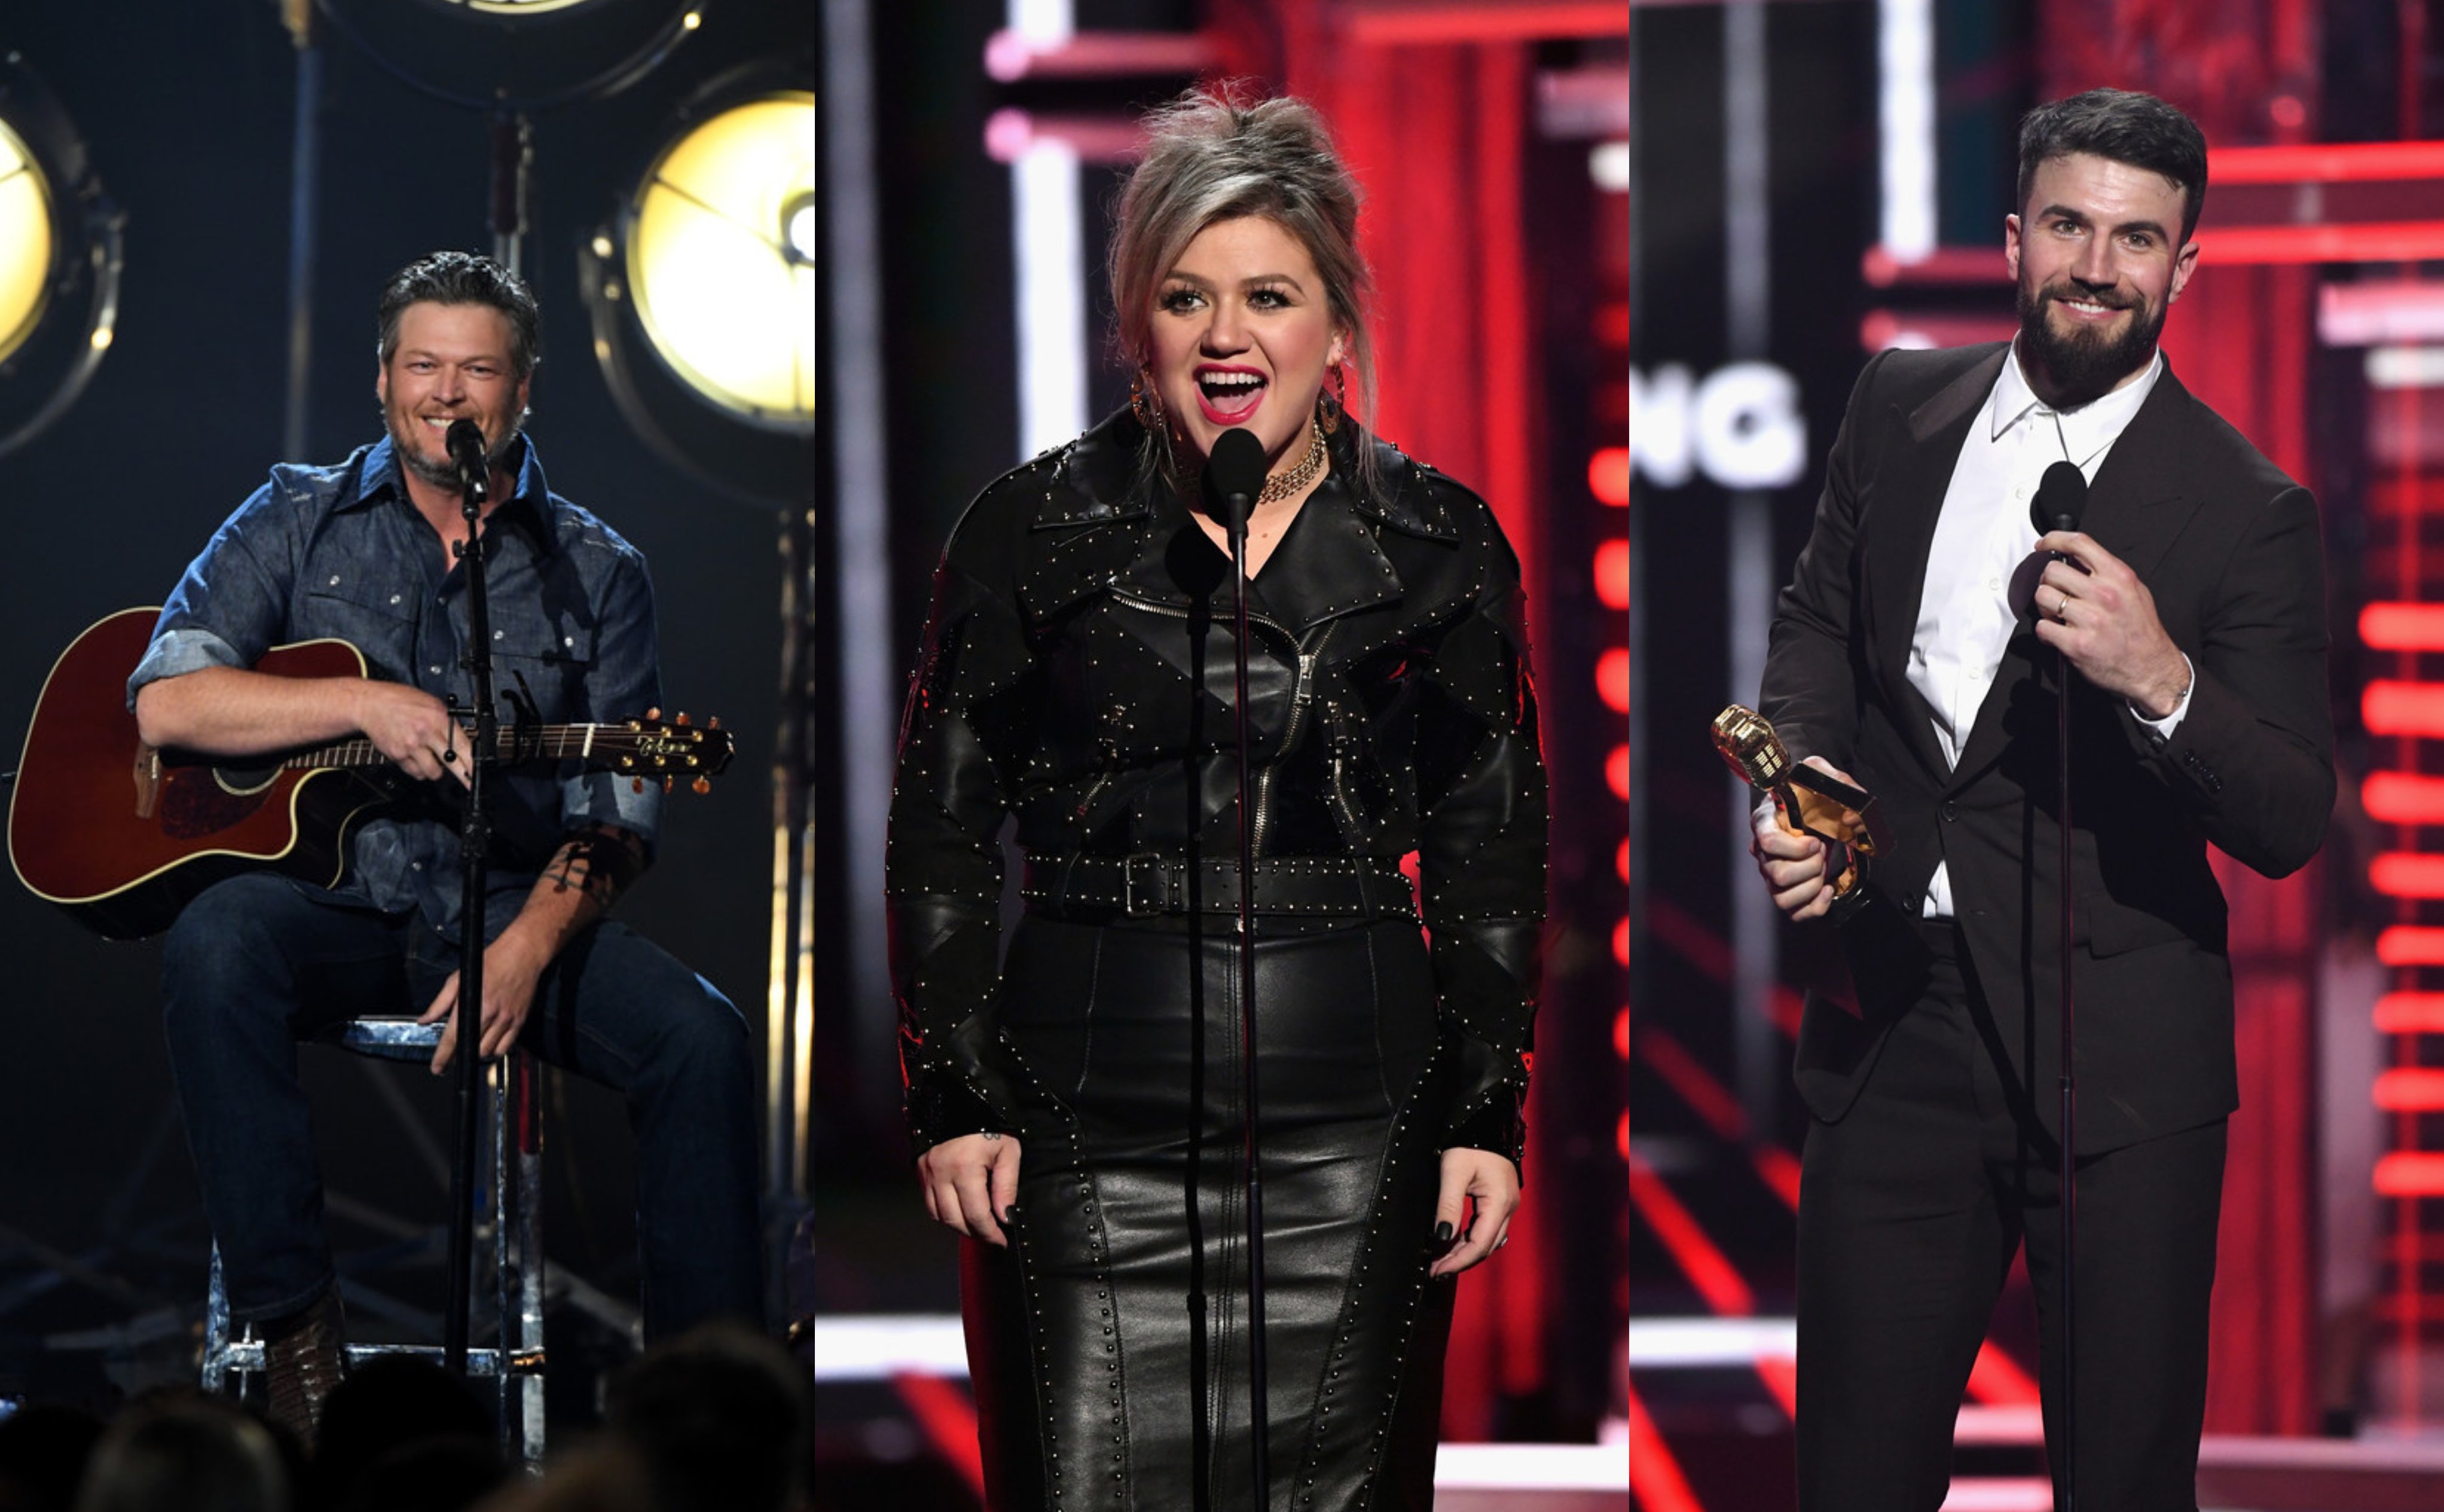 Blake Shelton, Kelly Clarkson, Luke Bryan and Sam Hunt to Perform at the 2018 CMT Music Awards